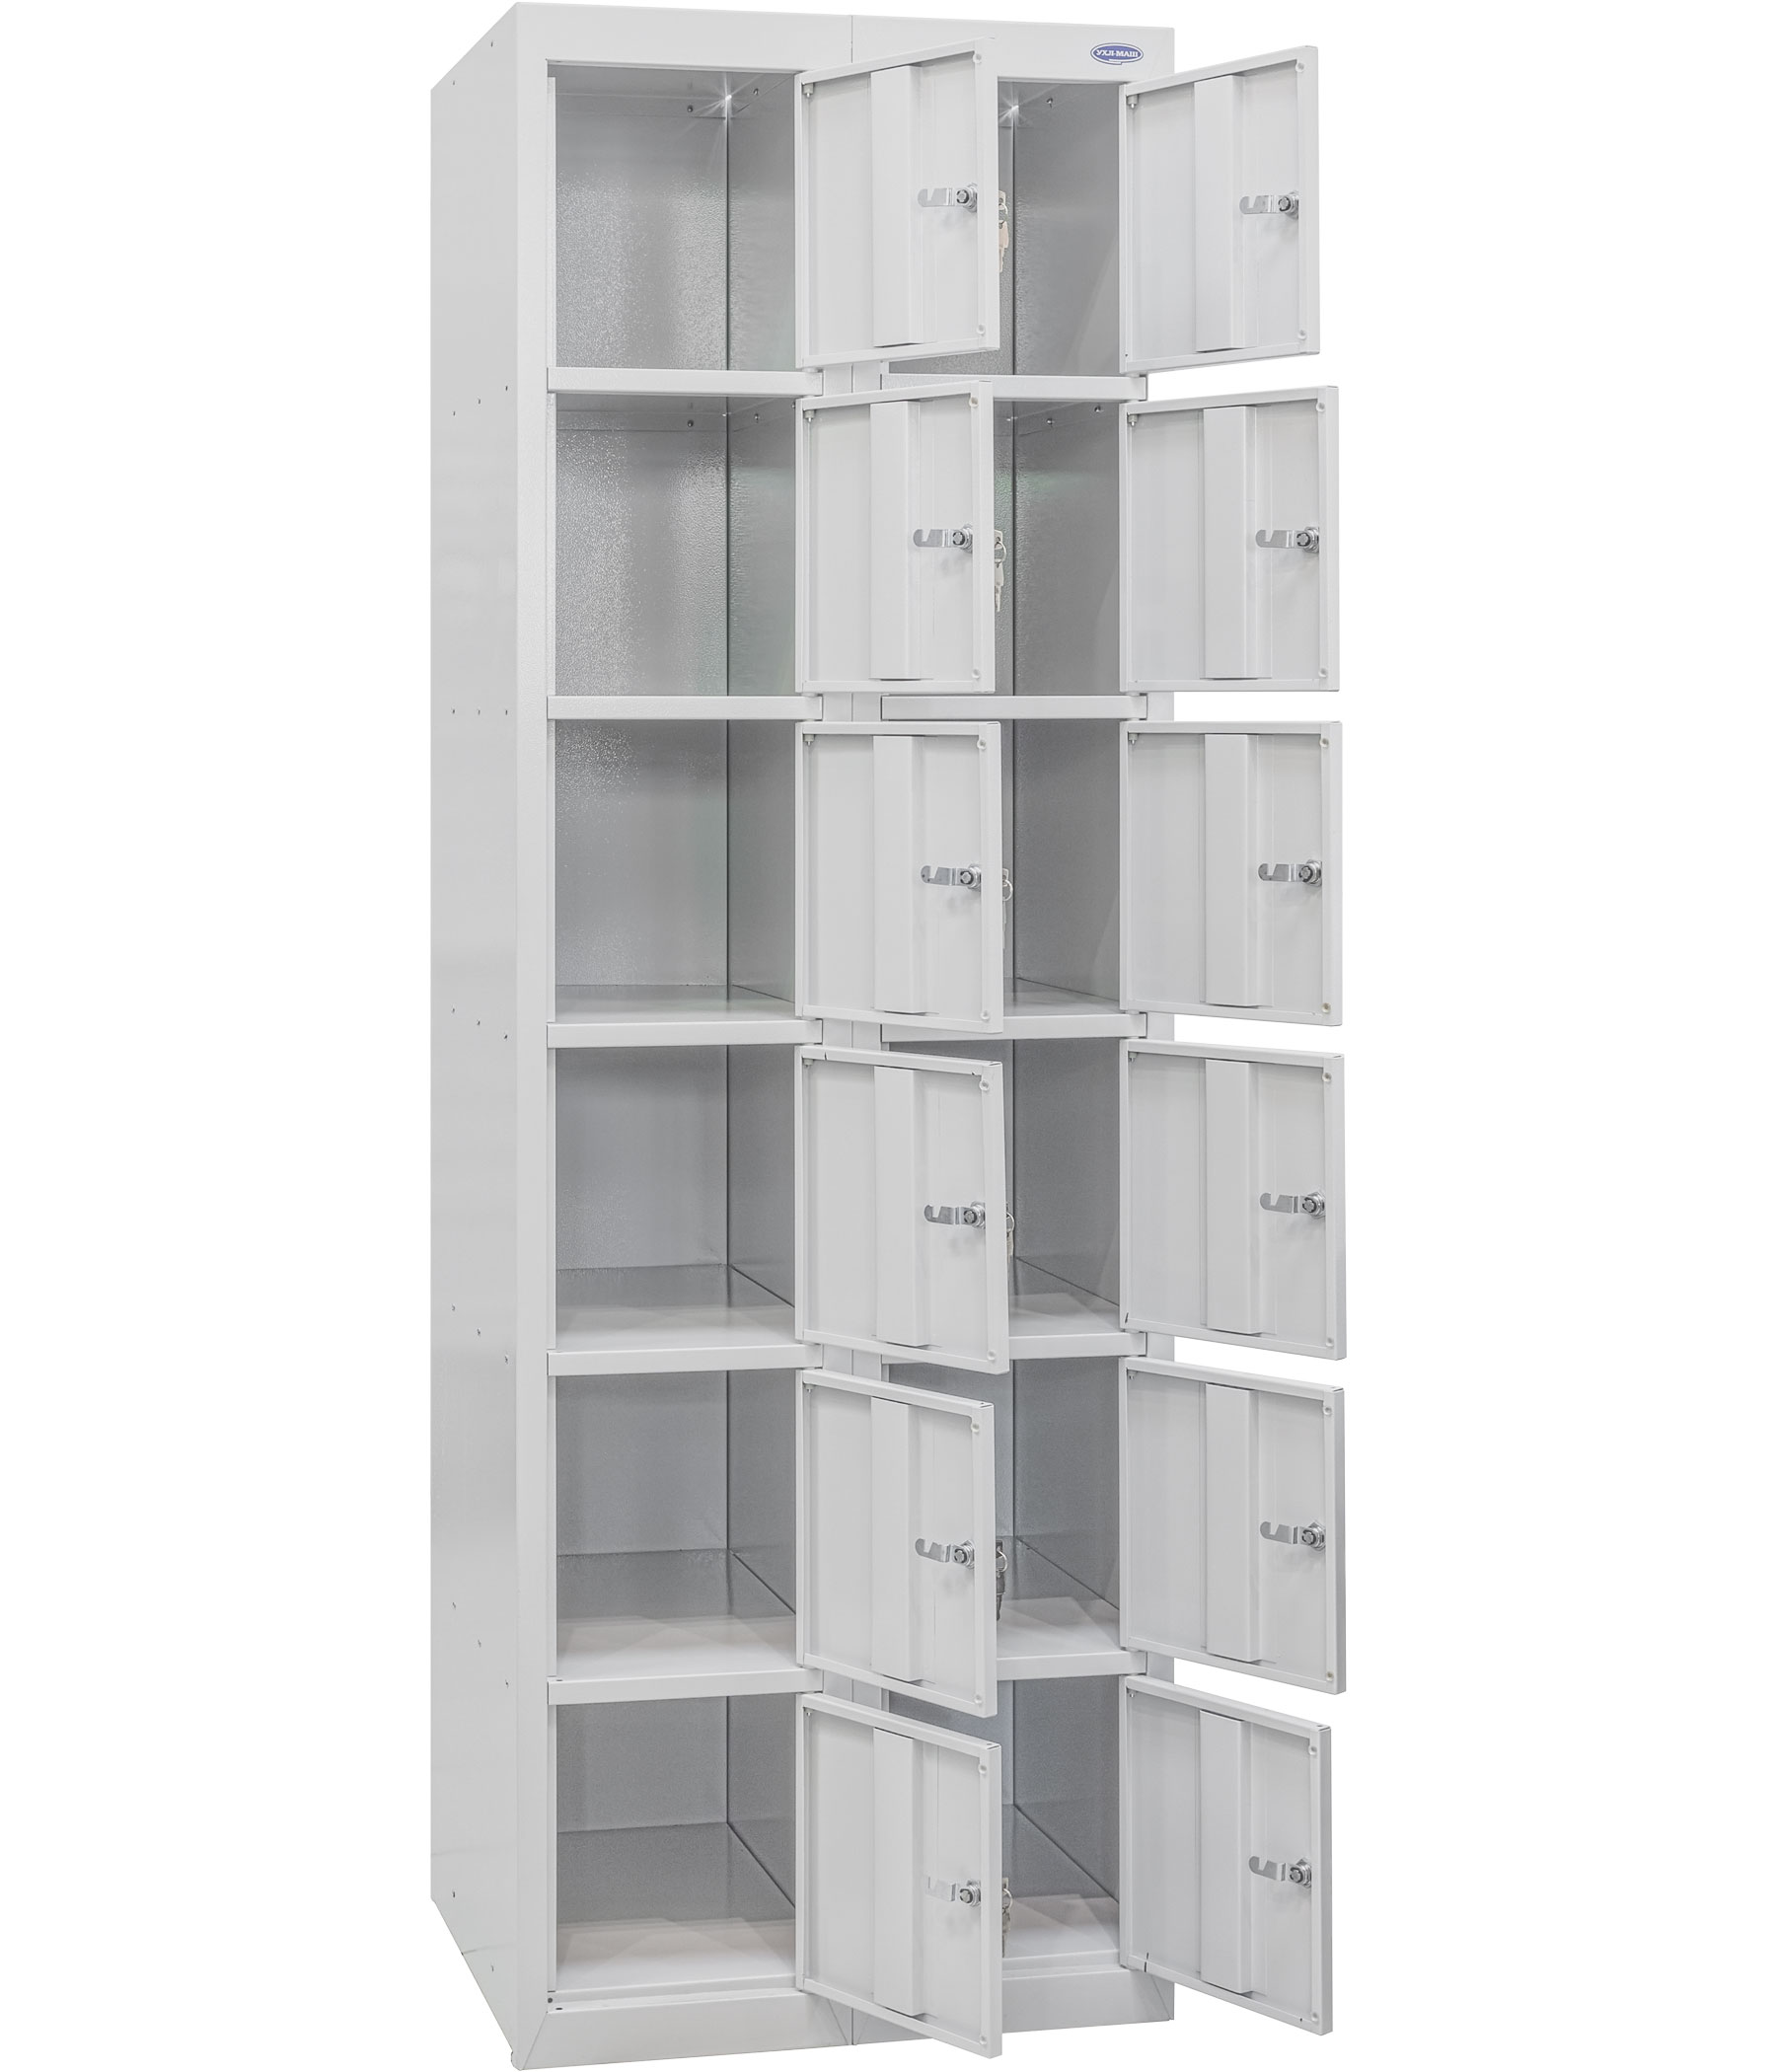 Open two-section cellular wardrobe of the SO series for 12 cells